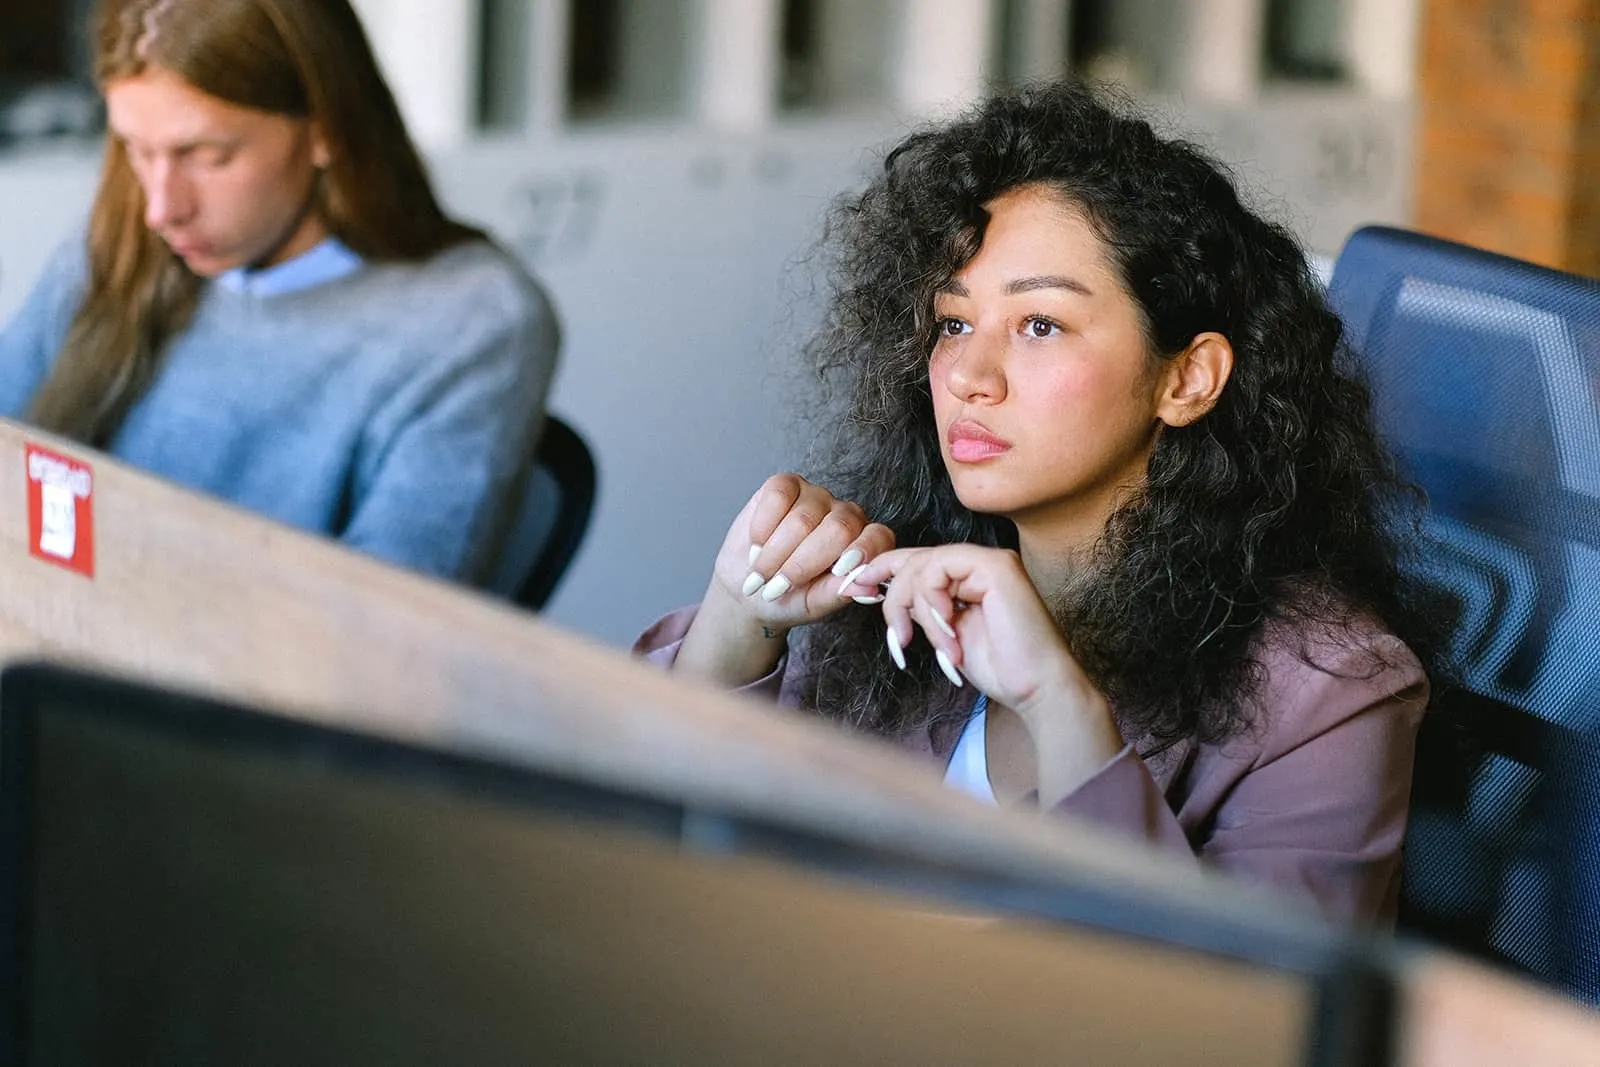 pensive woman sitting at workplace and looking straight in front her